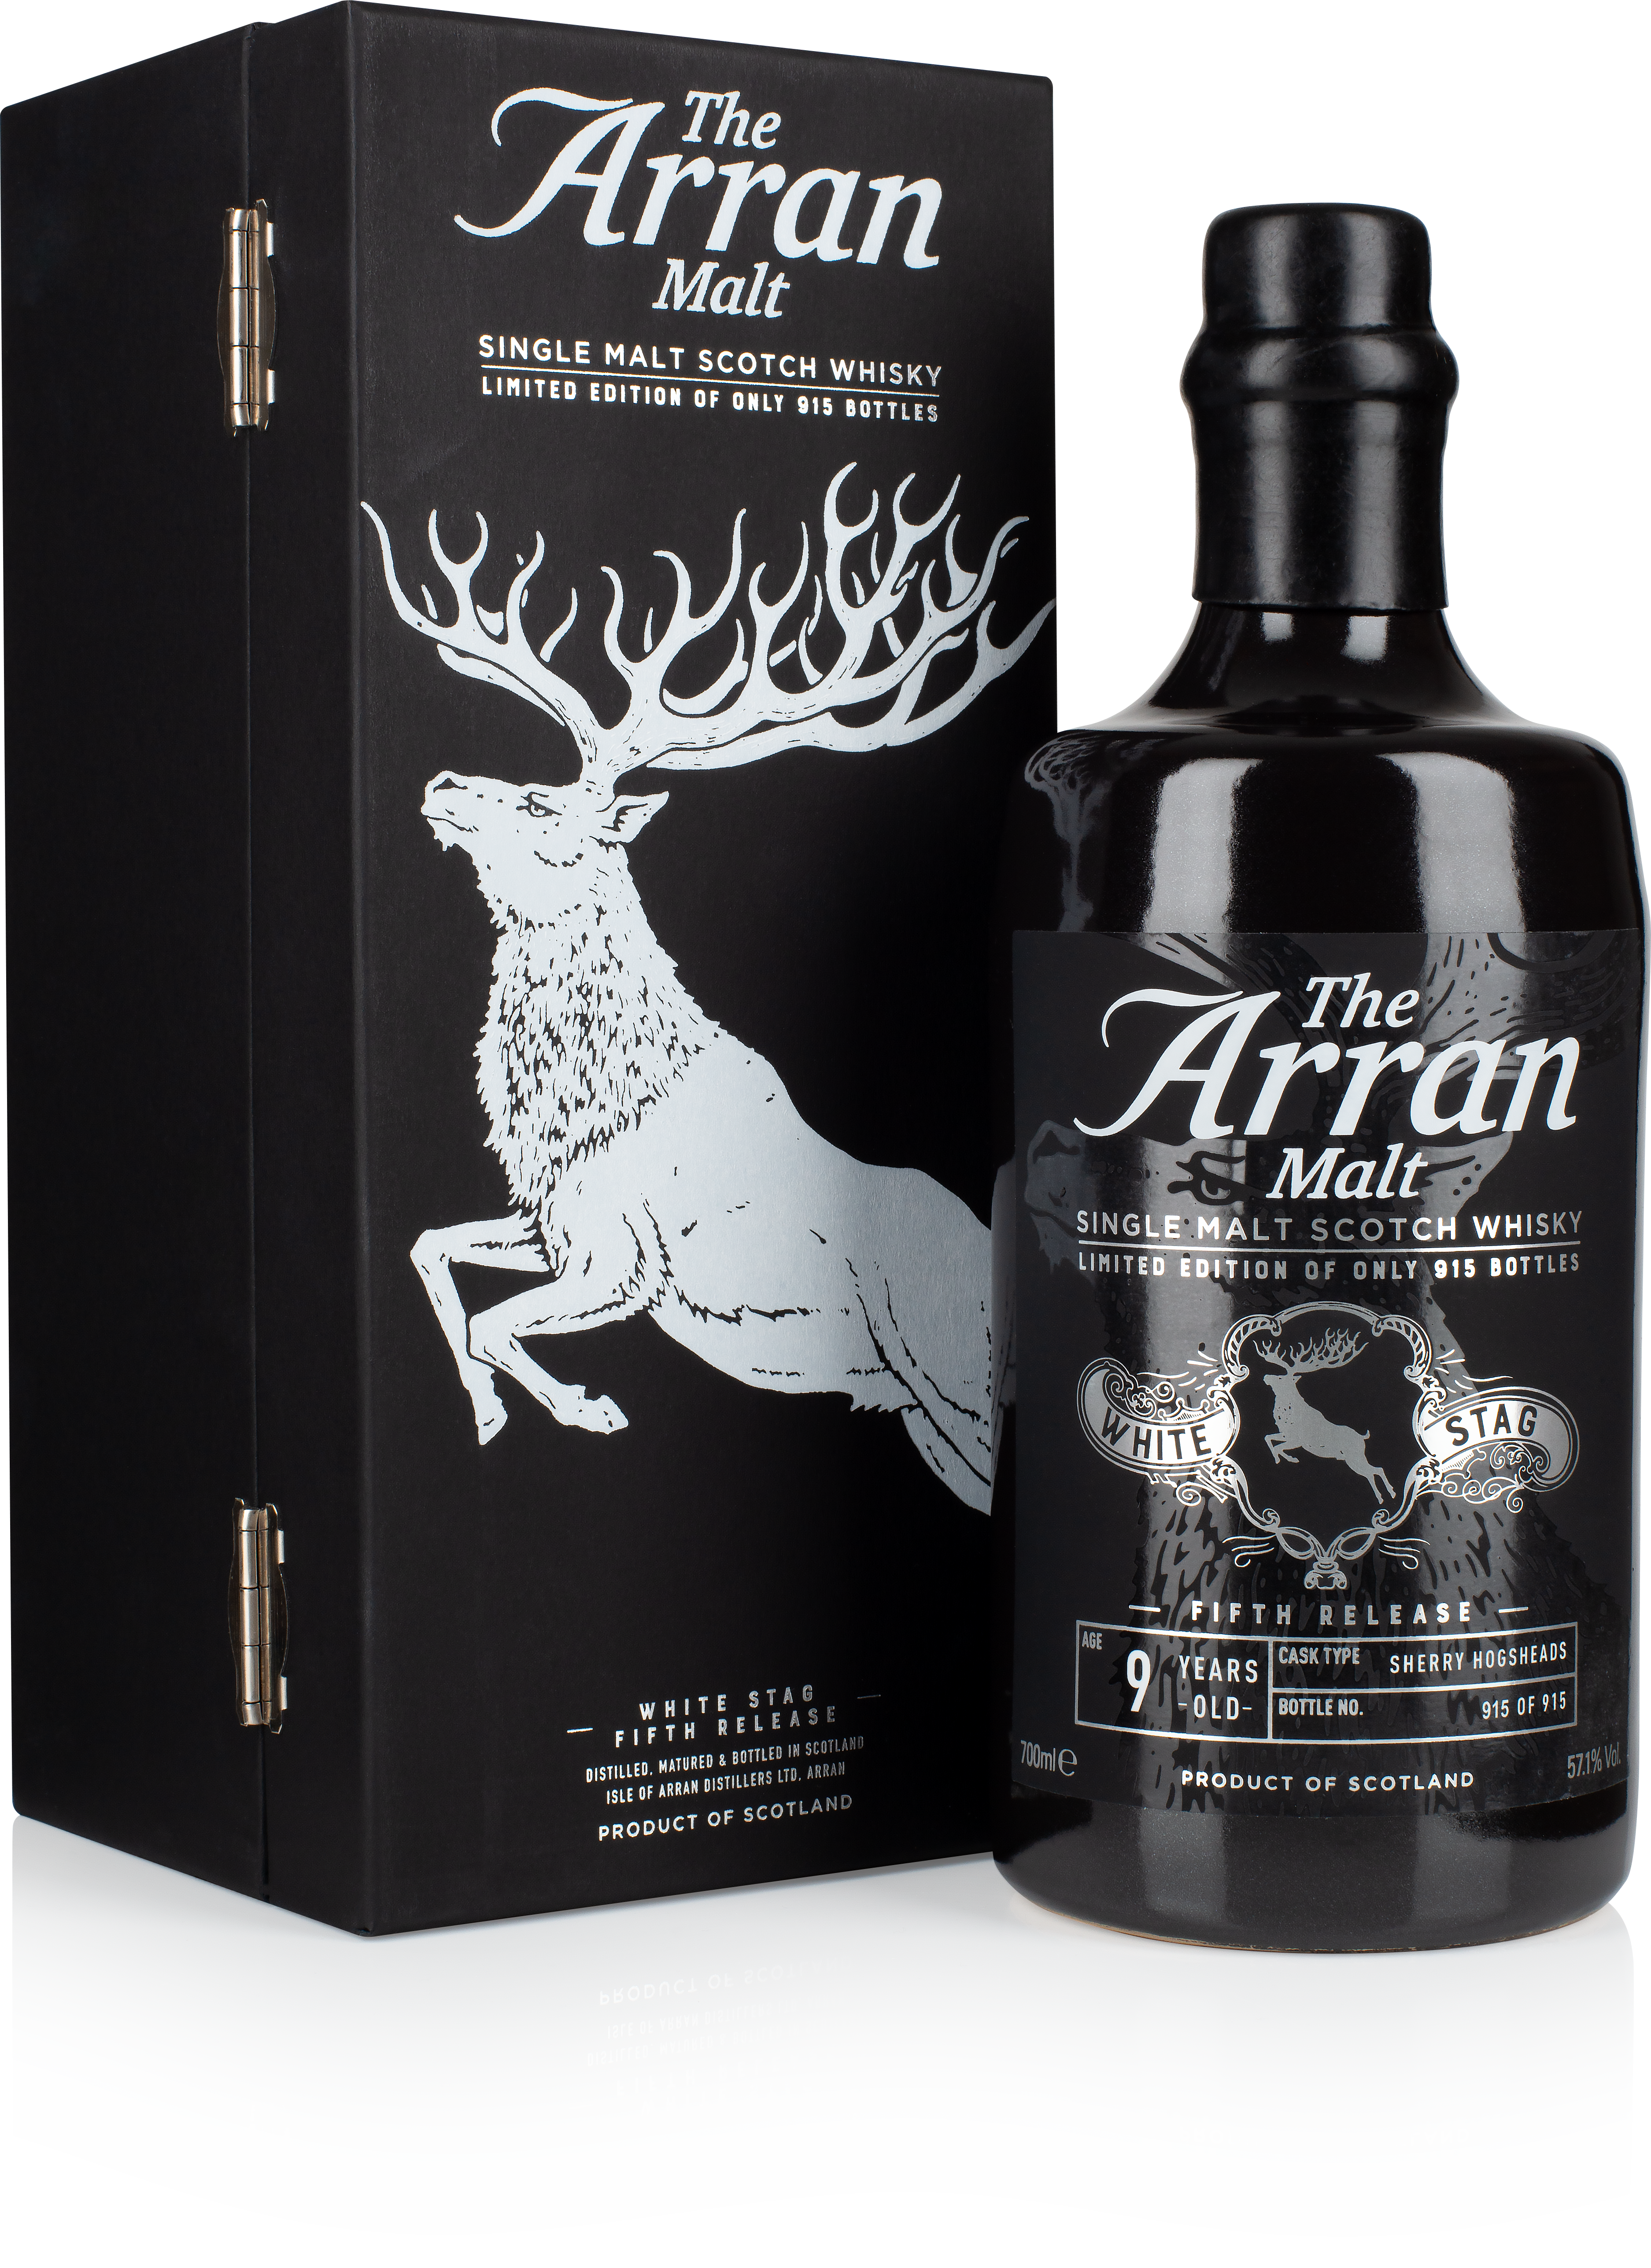 White Stag Fifth Release